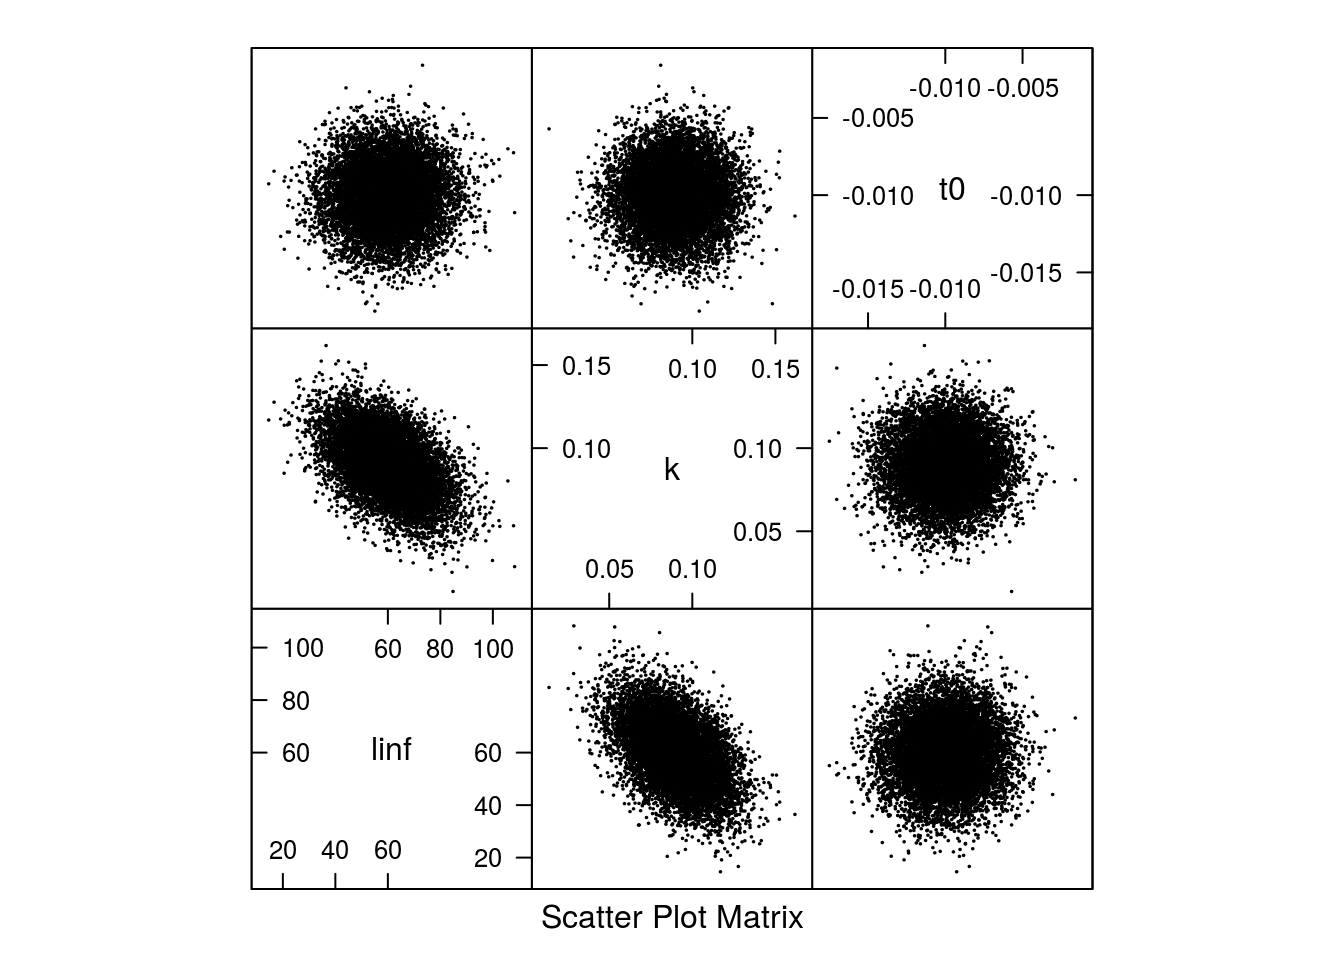 Scatter plot of the 10000 samples parameter from the multivariate normal distribution.